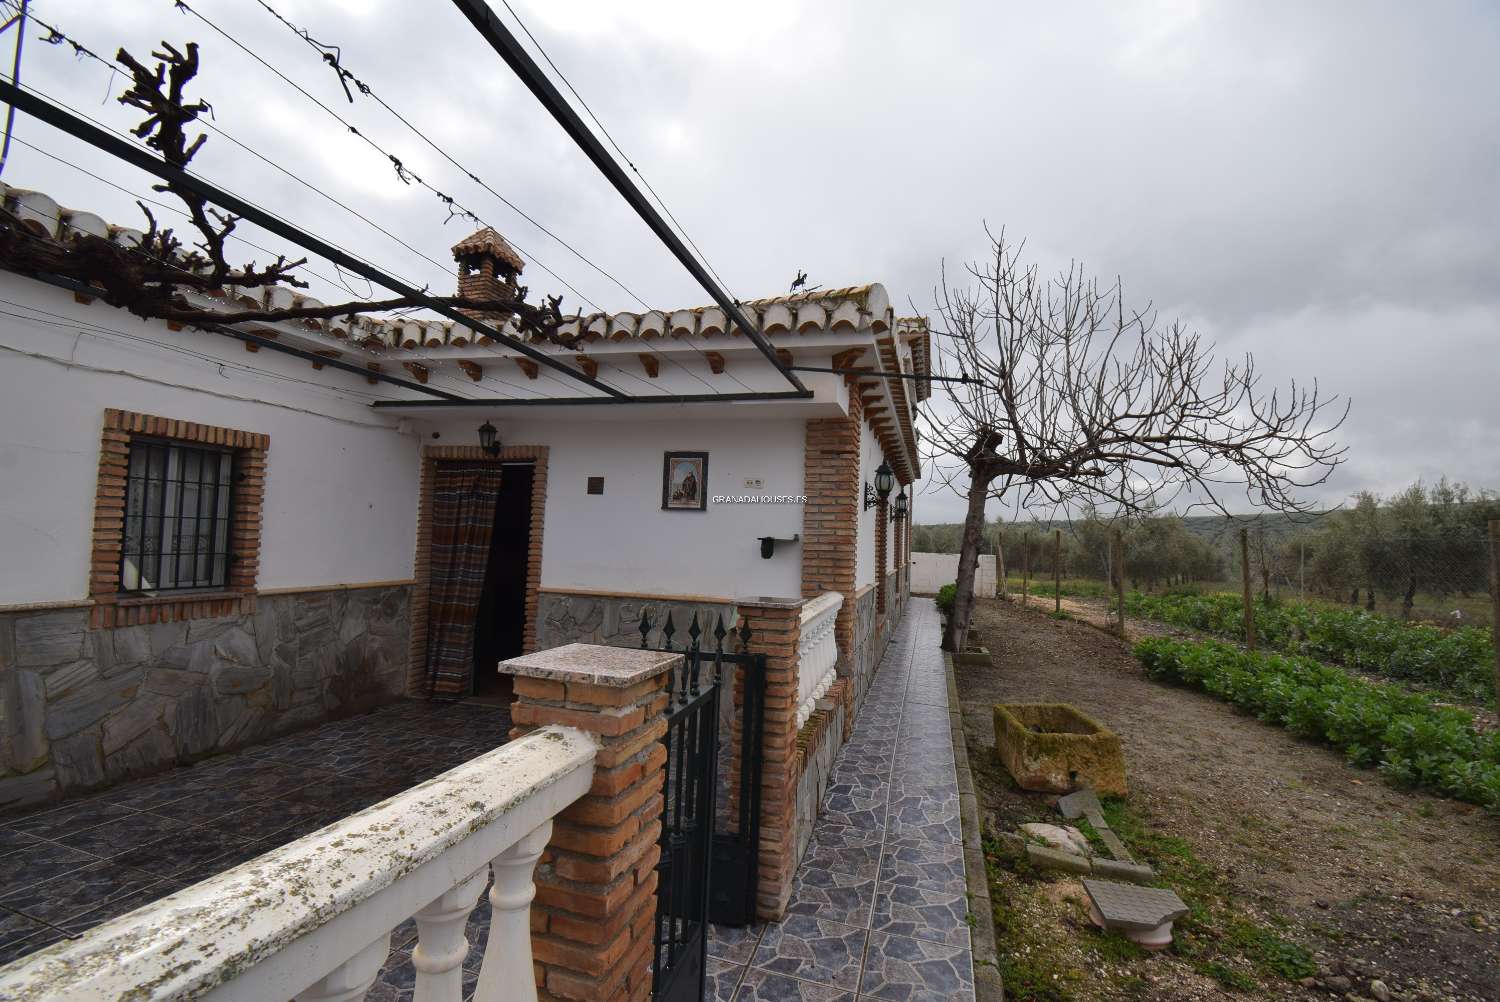 CORTIJO RURAL HOUSE WITH STABLES AND BARN